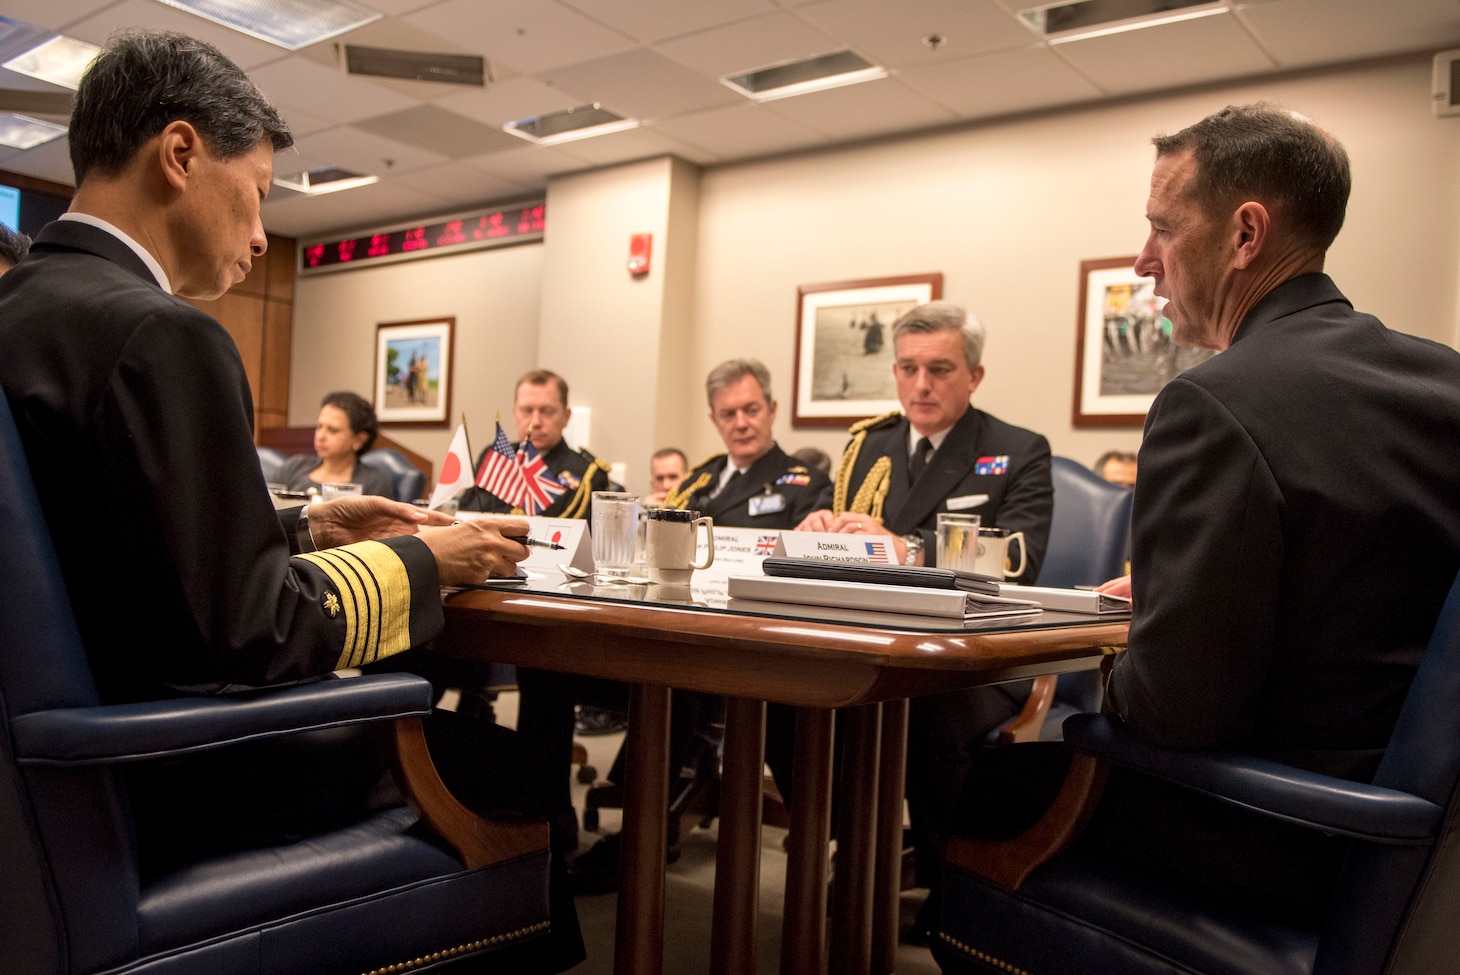 Chief of Naval Operations (CNO) Adm. John Richardson; First Sea Lord, United Kingdom Royal Navy, Adm. Phillip Jones; and Chief of Staff of the Japan Maritime Self-Defence Force, Adm. Tomohisa Takei, meet in the Pentagon for a trilateral maritime discussion, Oct. 20. The three heads of Navy signed an agreement affirming their commitment to collaboration and cooperation.